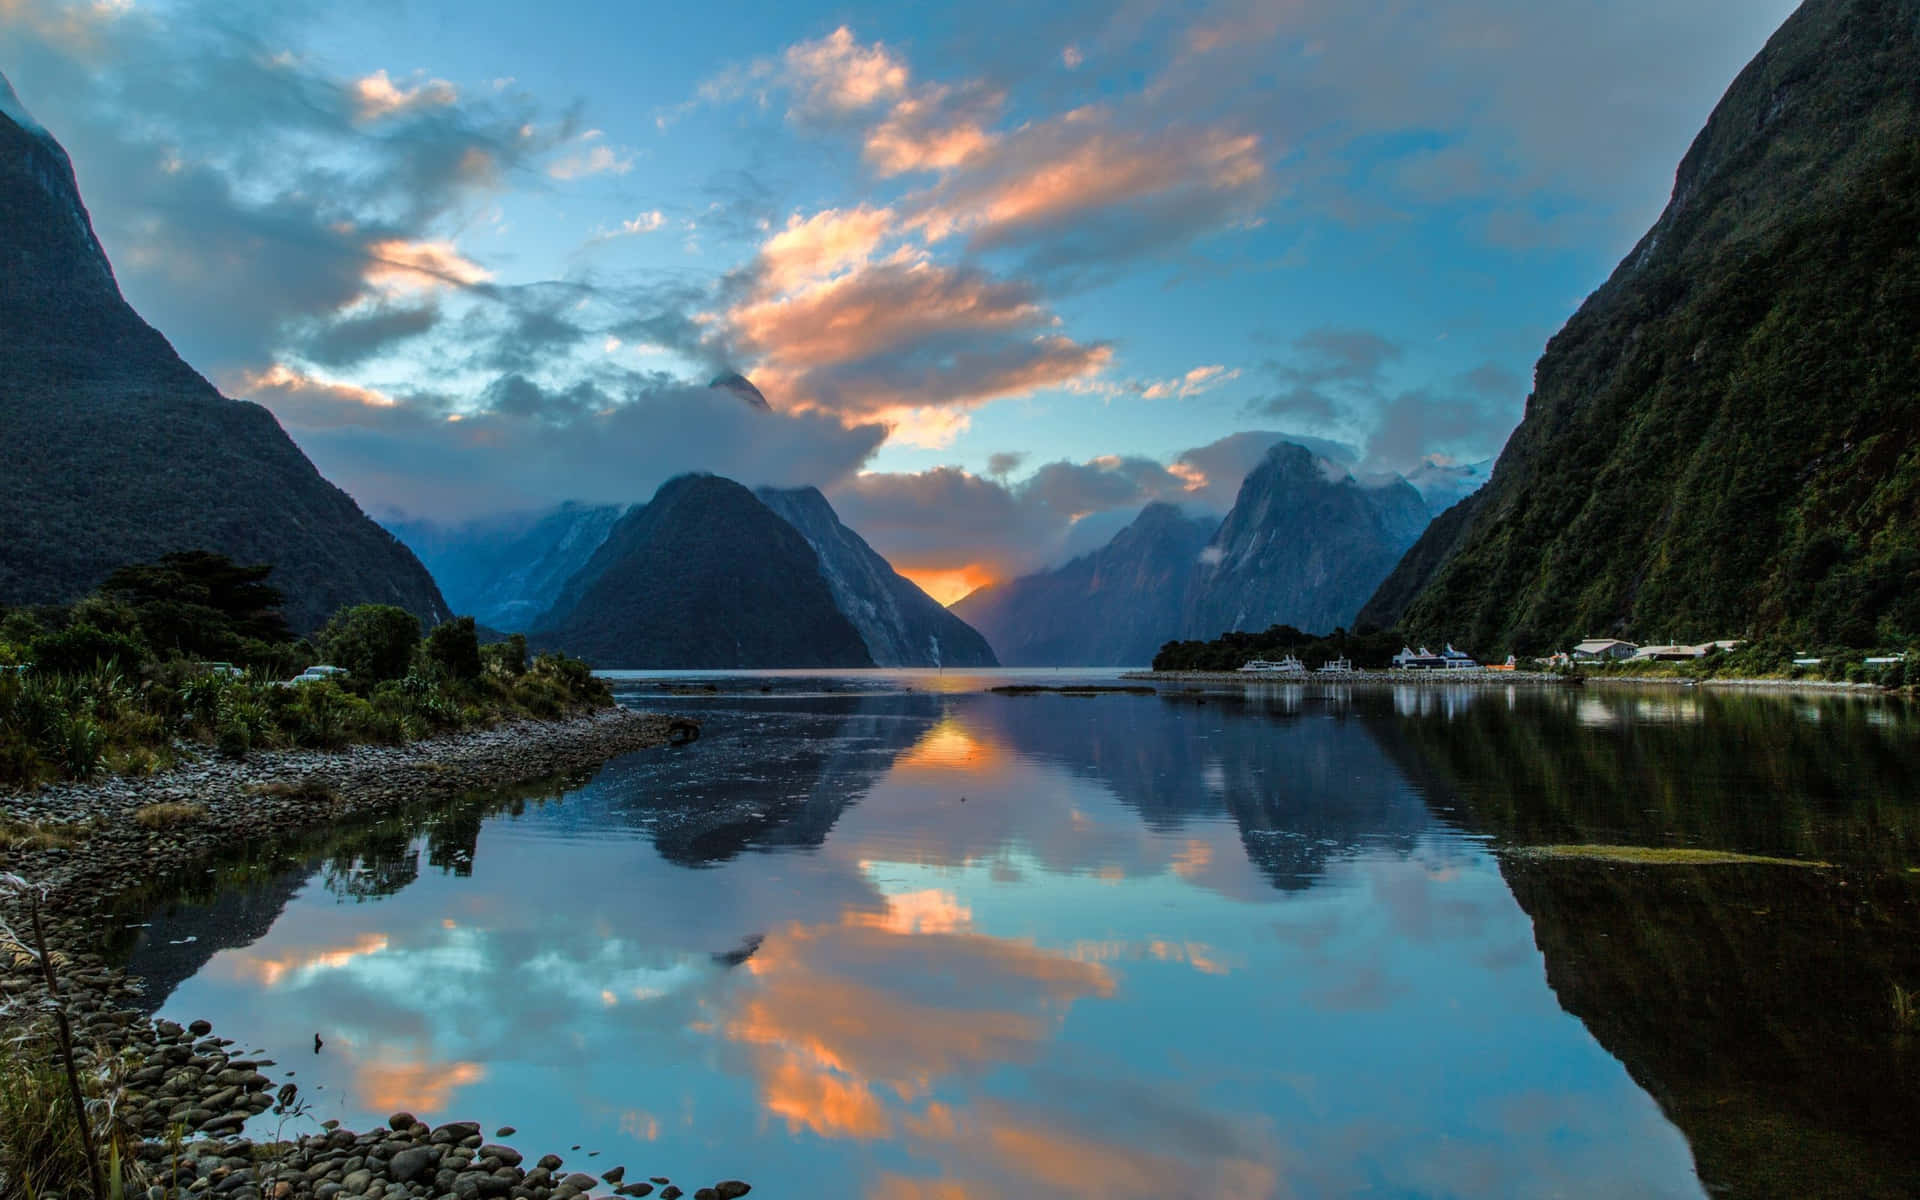 Take in the sweeping views of New Zealand's South Island